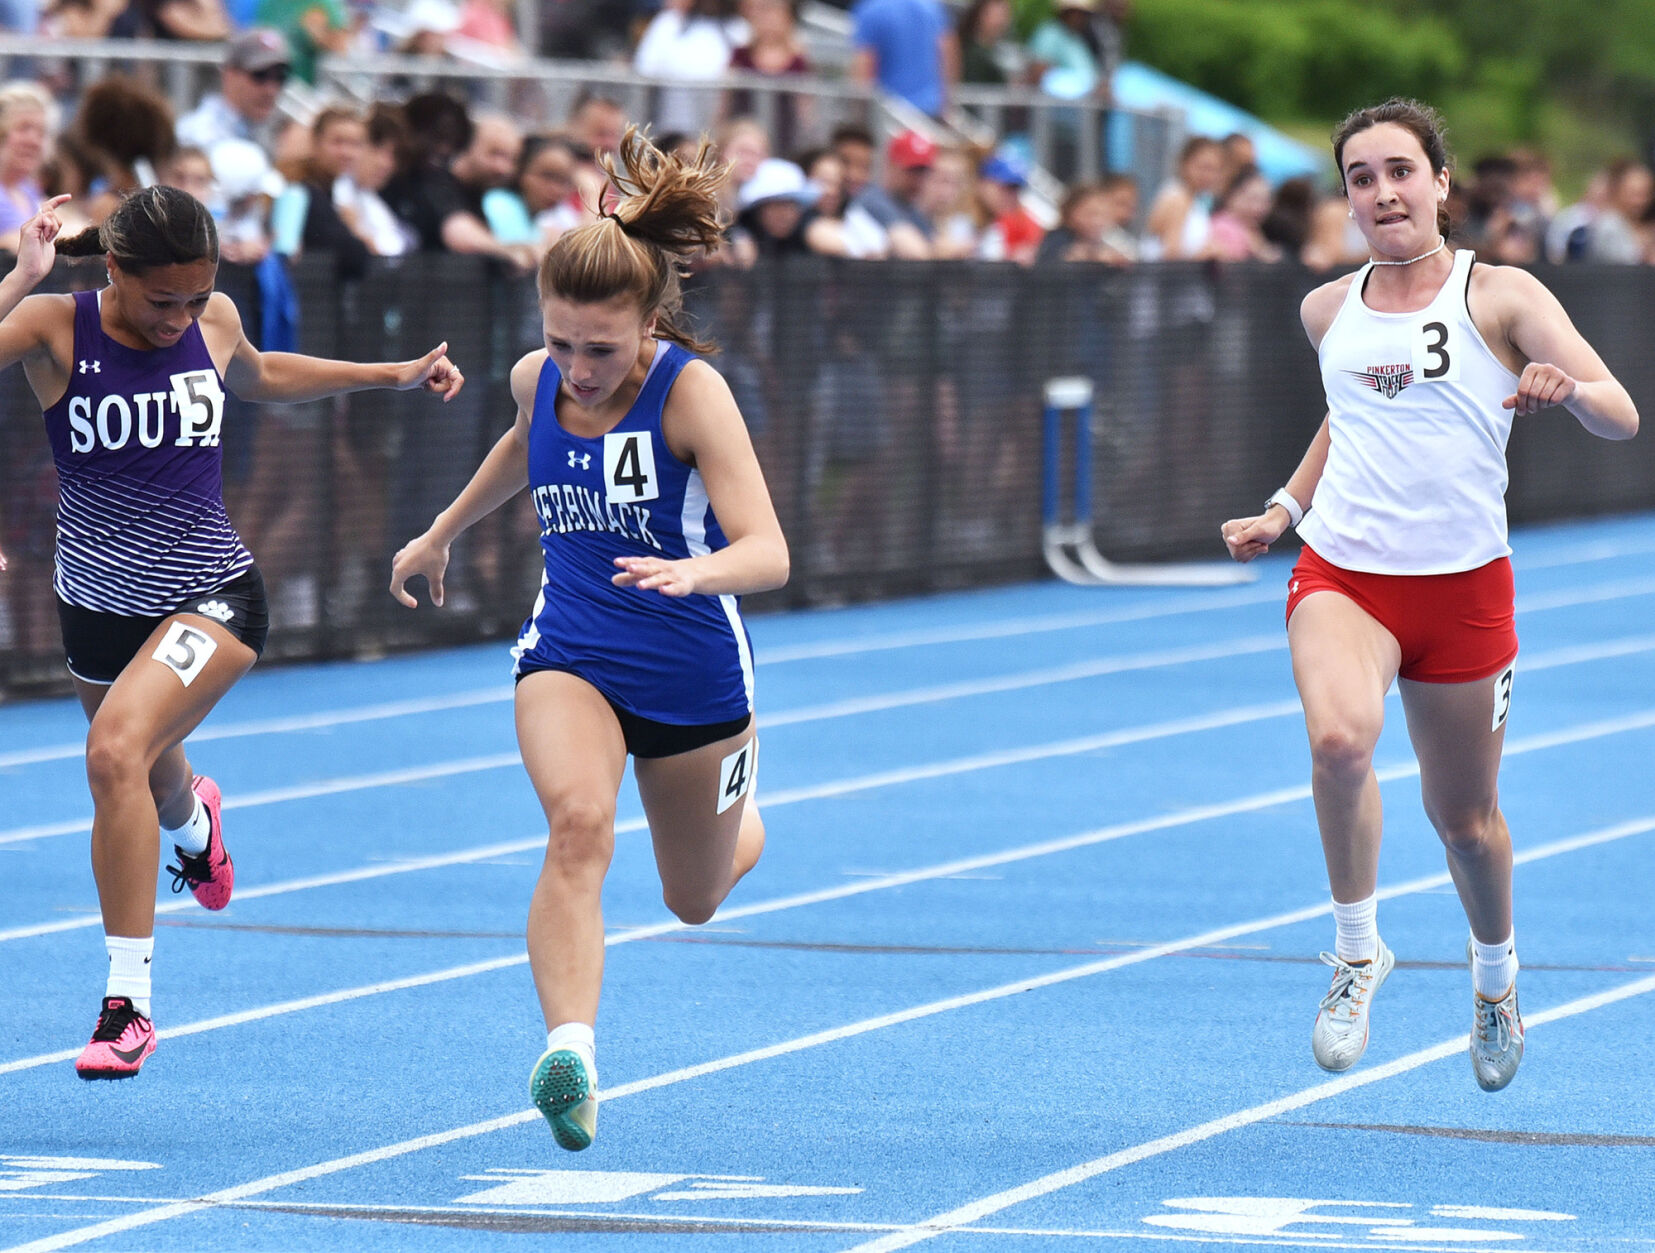 Pinkerton Dominates Londonderry Invitational Track Meet with Record-Breaking Performances